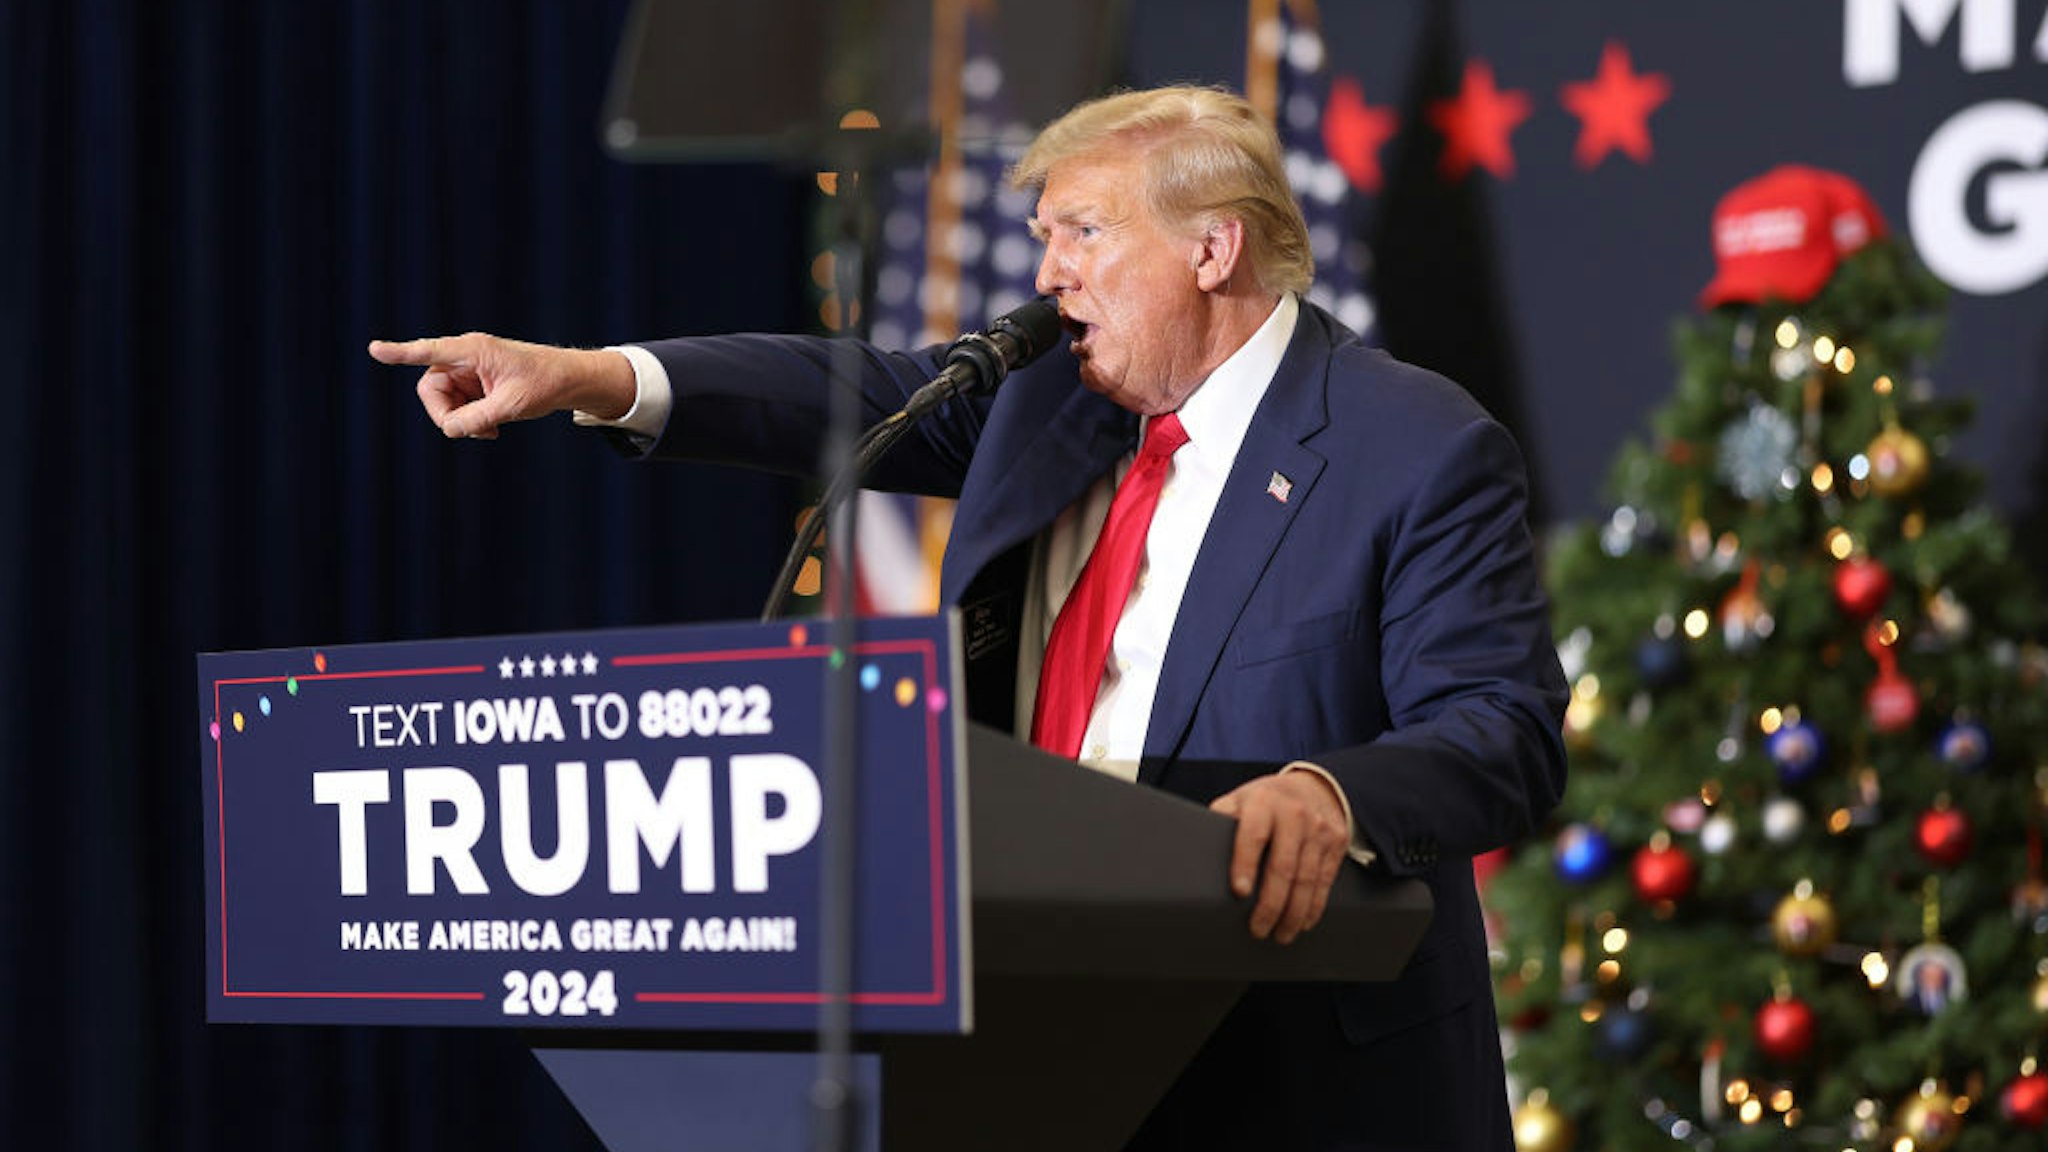 WATERLOO, IOWA - DECEMBER 19: Republican presidential candidate and former U.S. President Donald Trump speaks at a campaign event on December 19, 2023 in Waterloo, Iowa. Iowa Republicans will be the first to select their party's nomination for the 2024 presidential race, when they go to caucus on January 15, 2024.